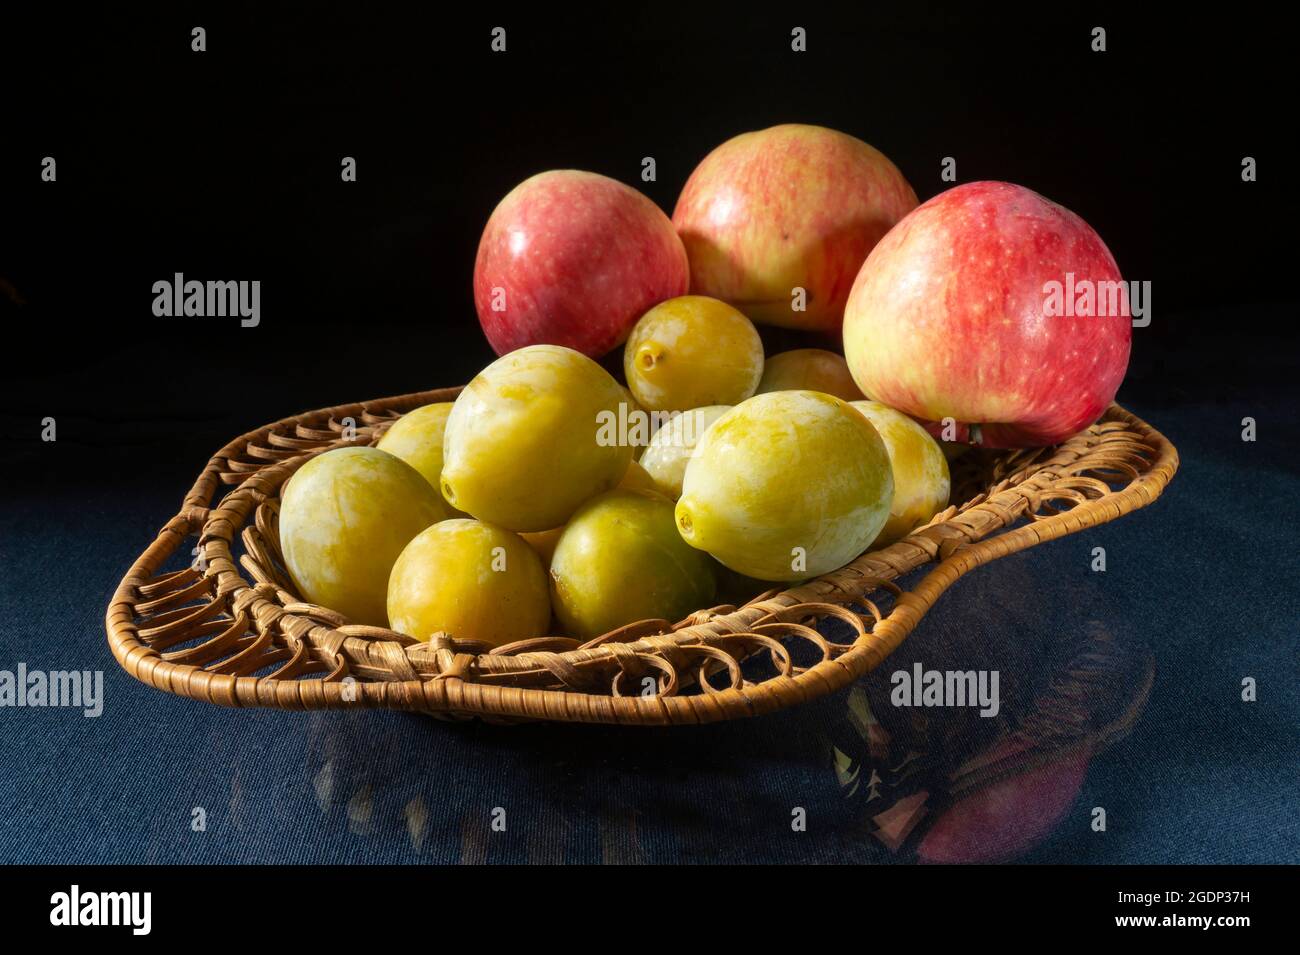 Honey plums with apples in a basket on the table with a reflection. Food products on a black background Stock Photo